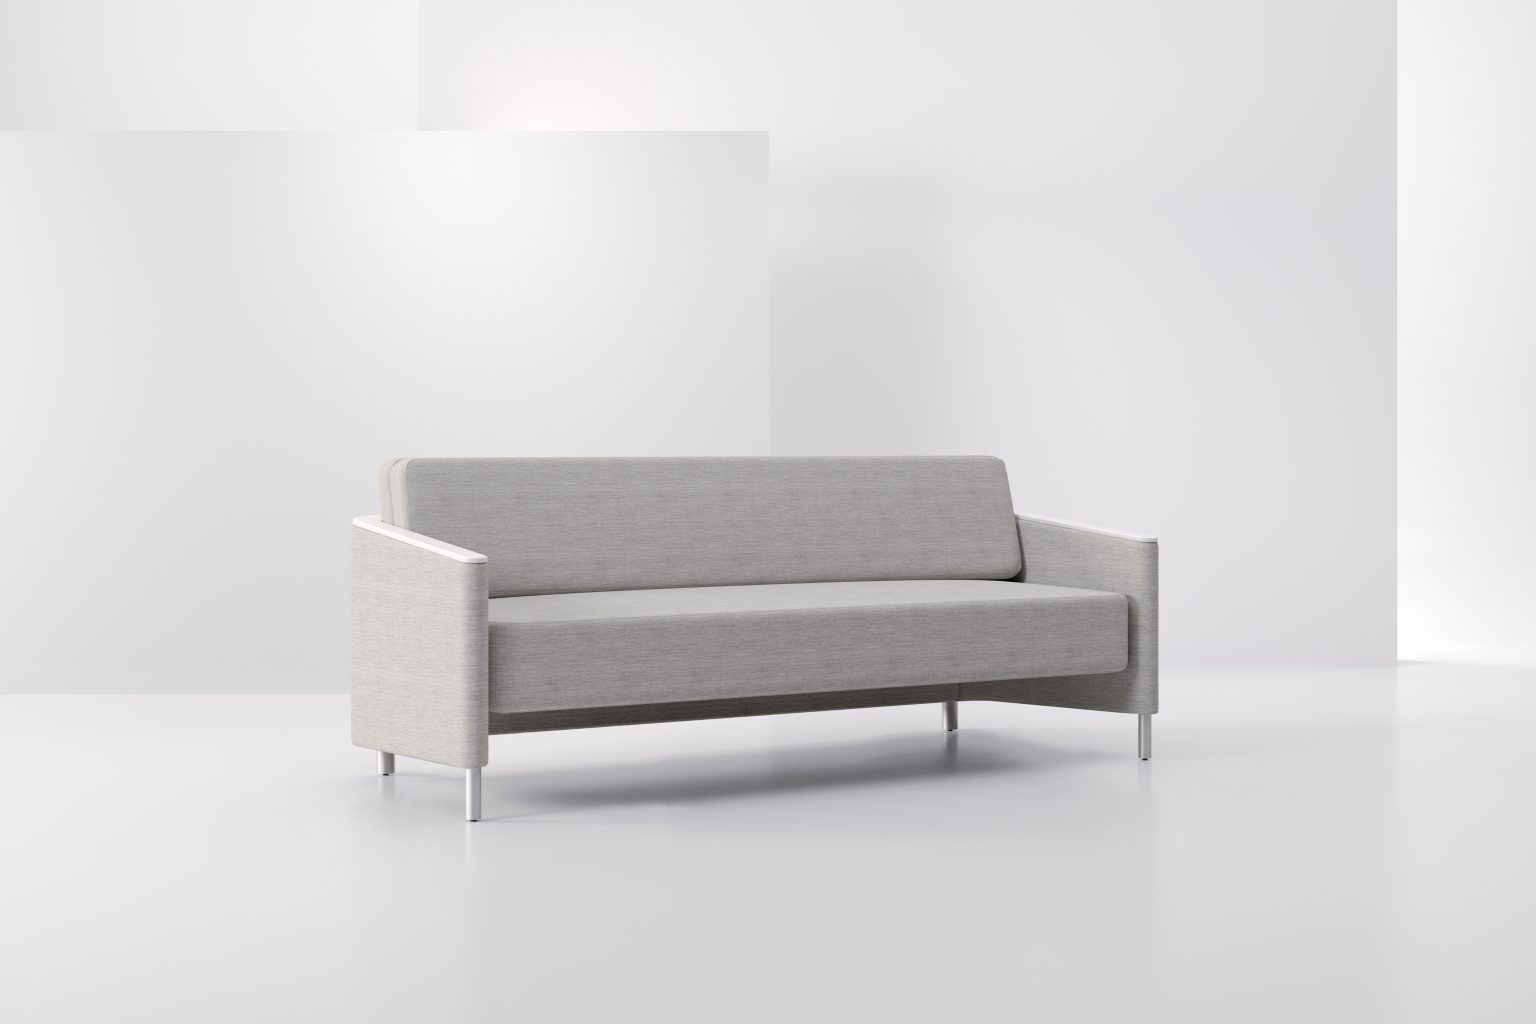 Rochester Flop Sofa Product Image 3